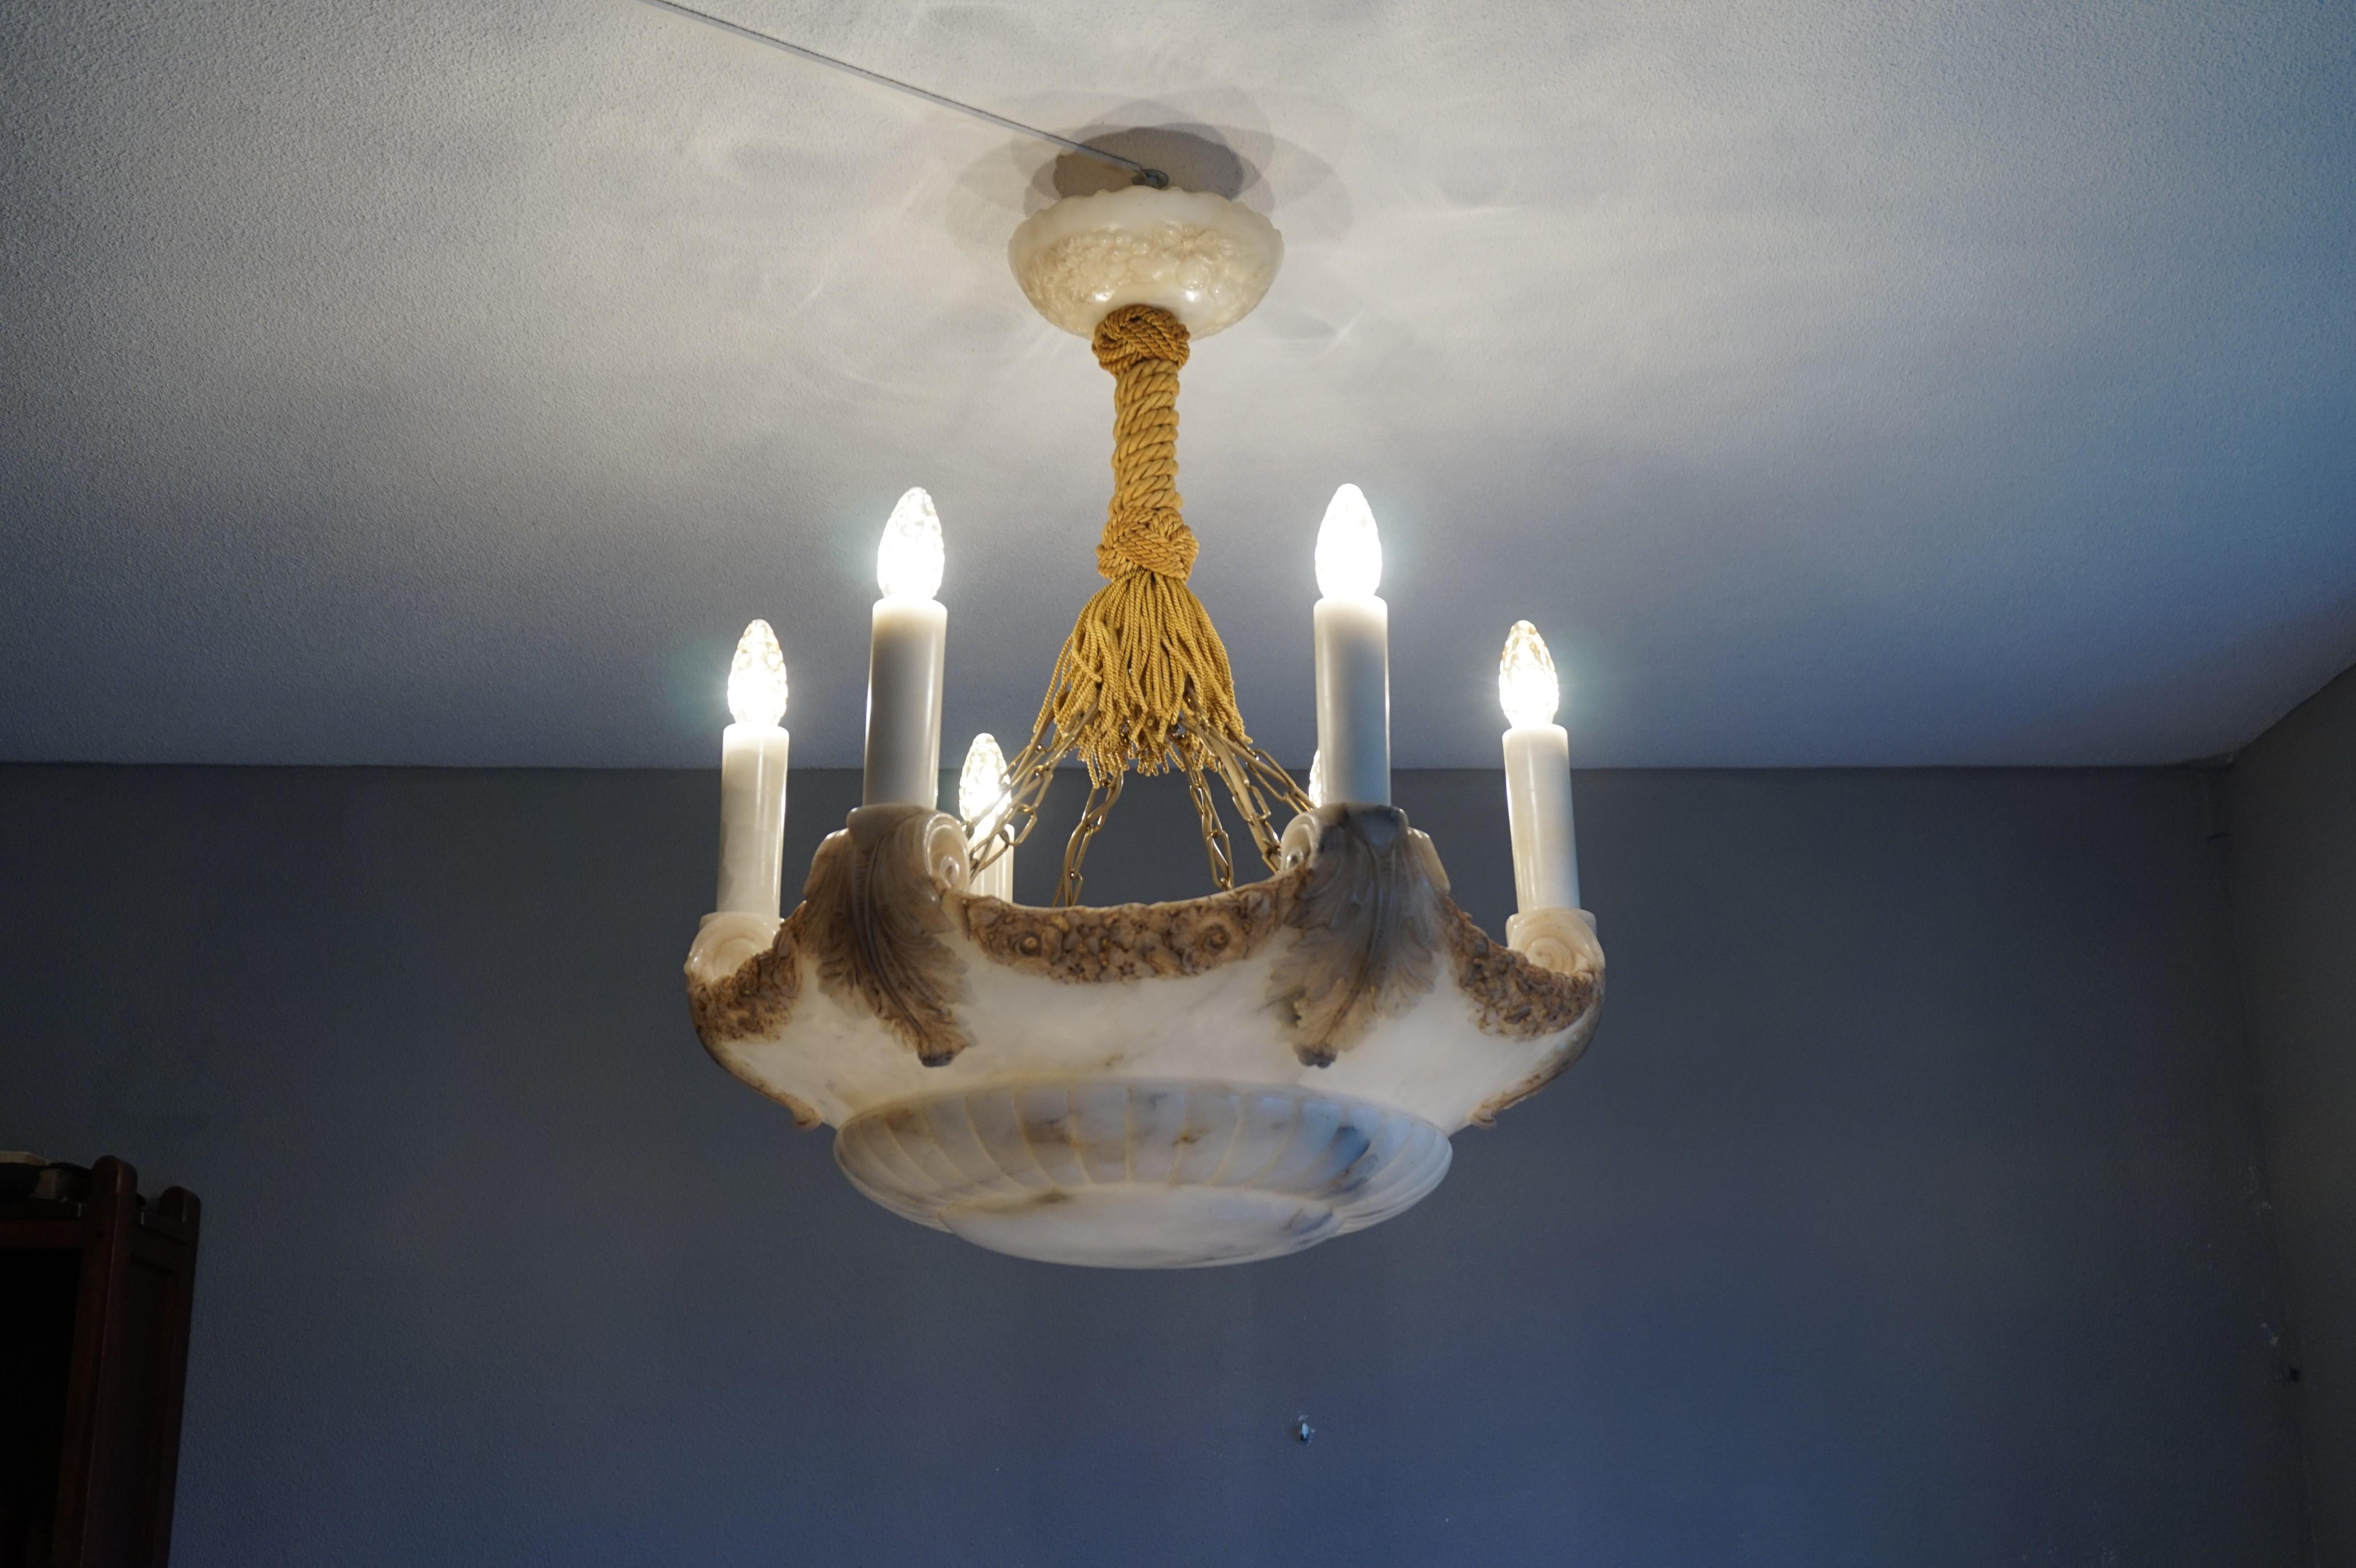 Monumental antique alabaster chandelier with amazing carvings.

With early 20th century lighting as one of our specialties we are certain that this Classical Revival alabaster chandelier was one of the first alabaster chandeliers that was created.